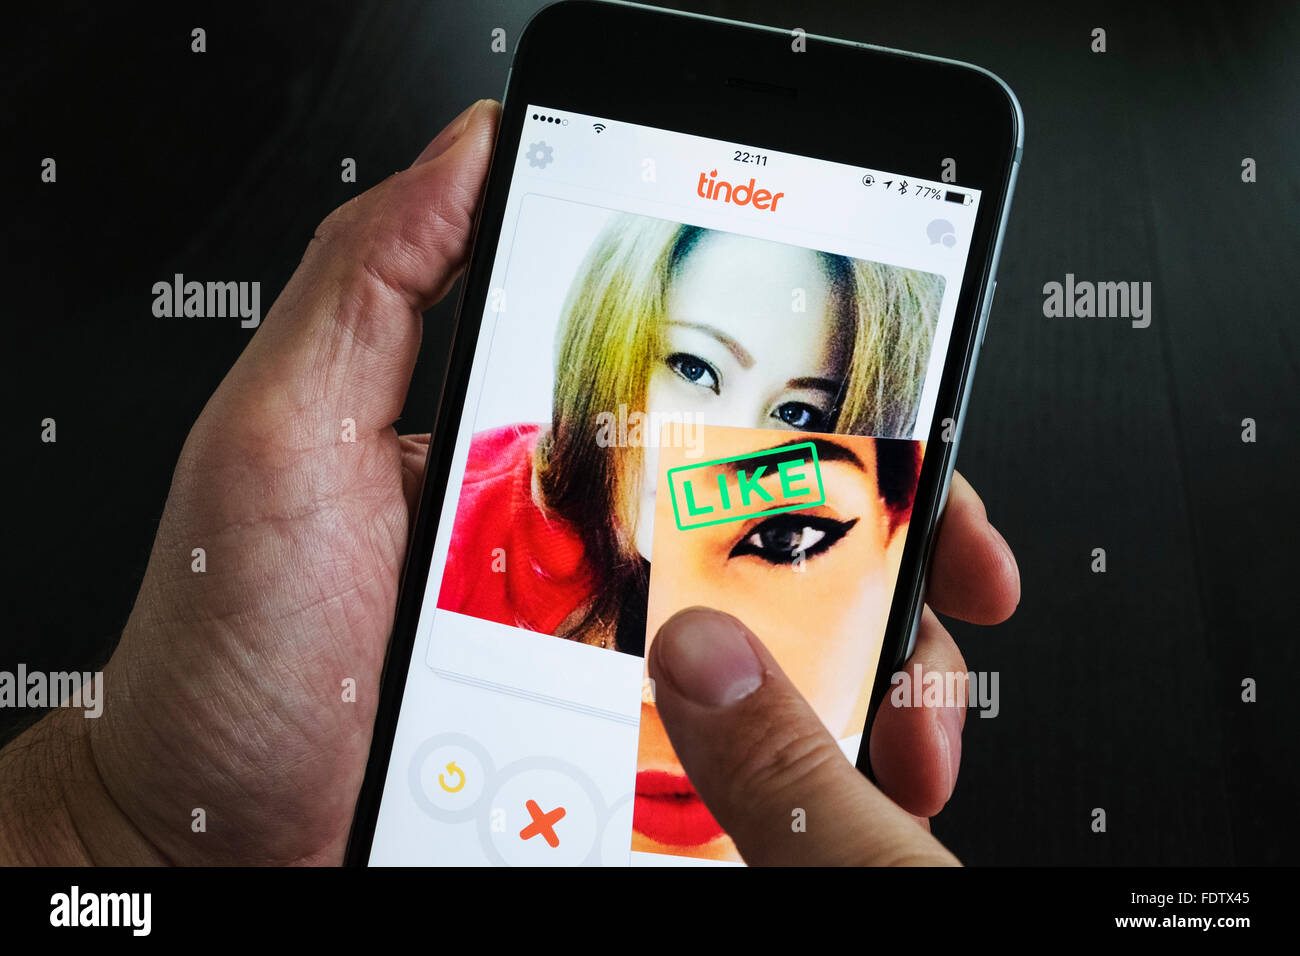 Tinder online dating app on a smartphone Stock Photo